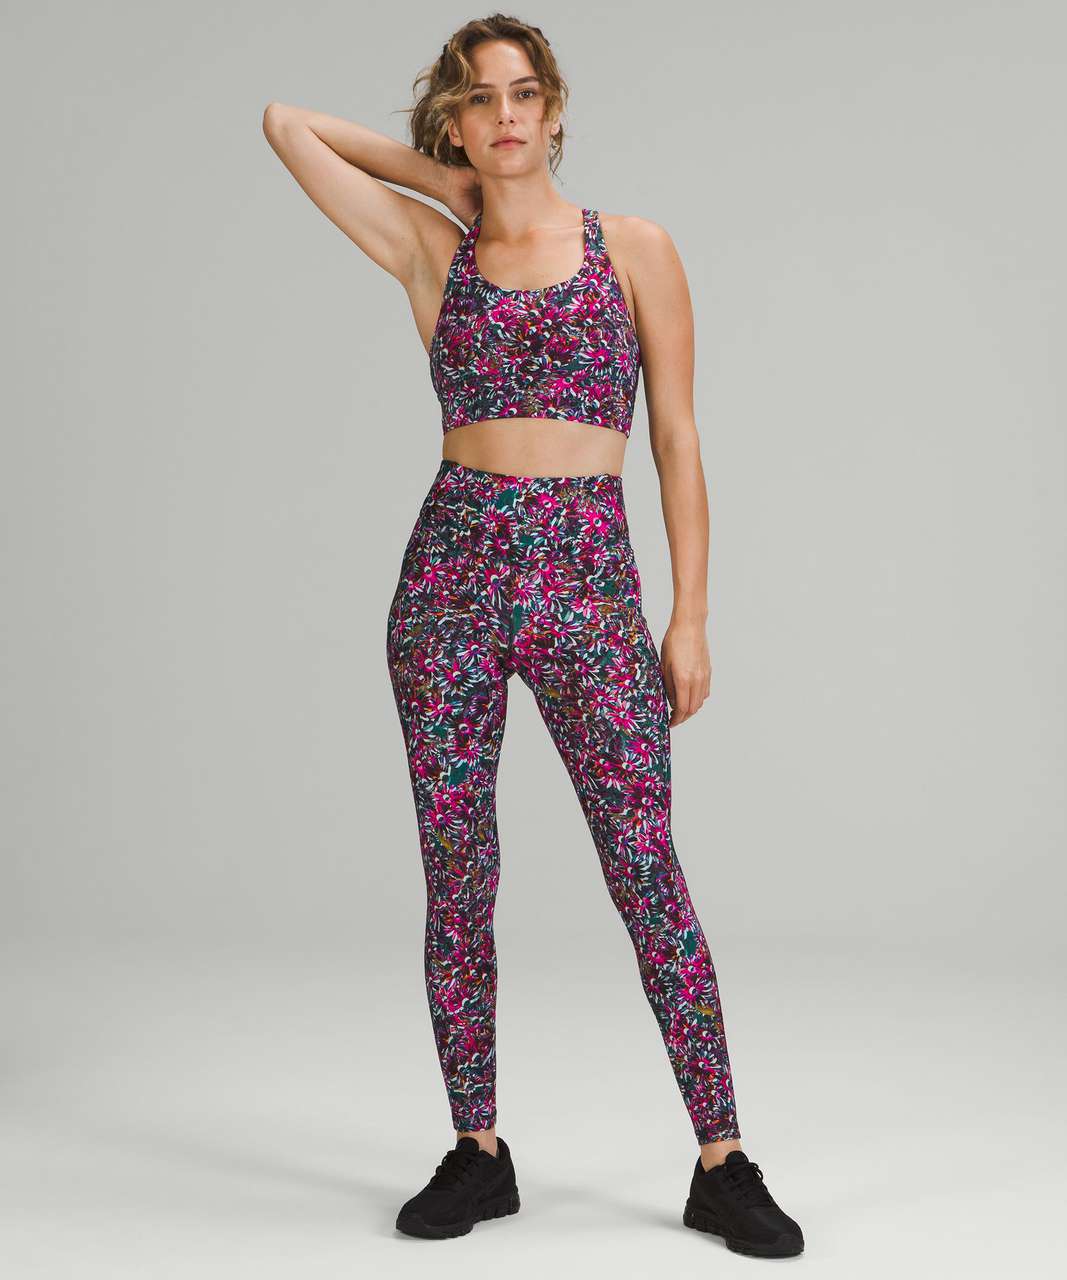 Lululemon Base Pace High-Rise Fleece Tight 28 - Floral Electric